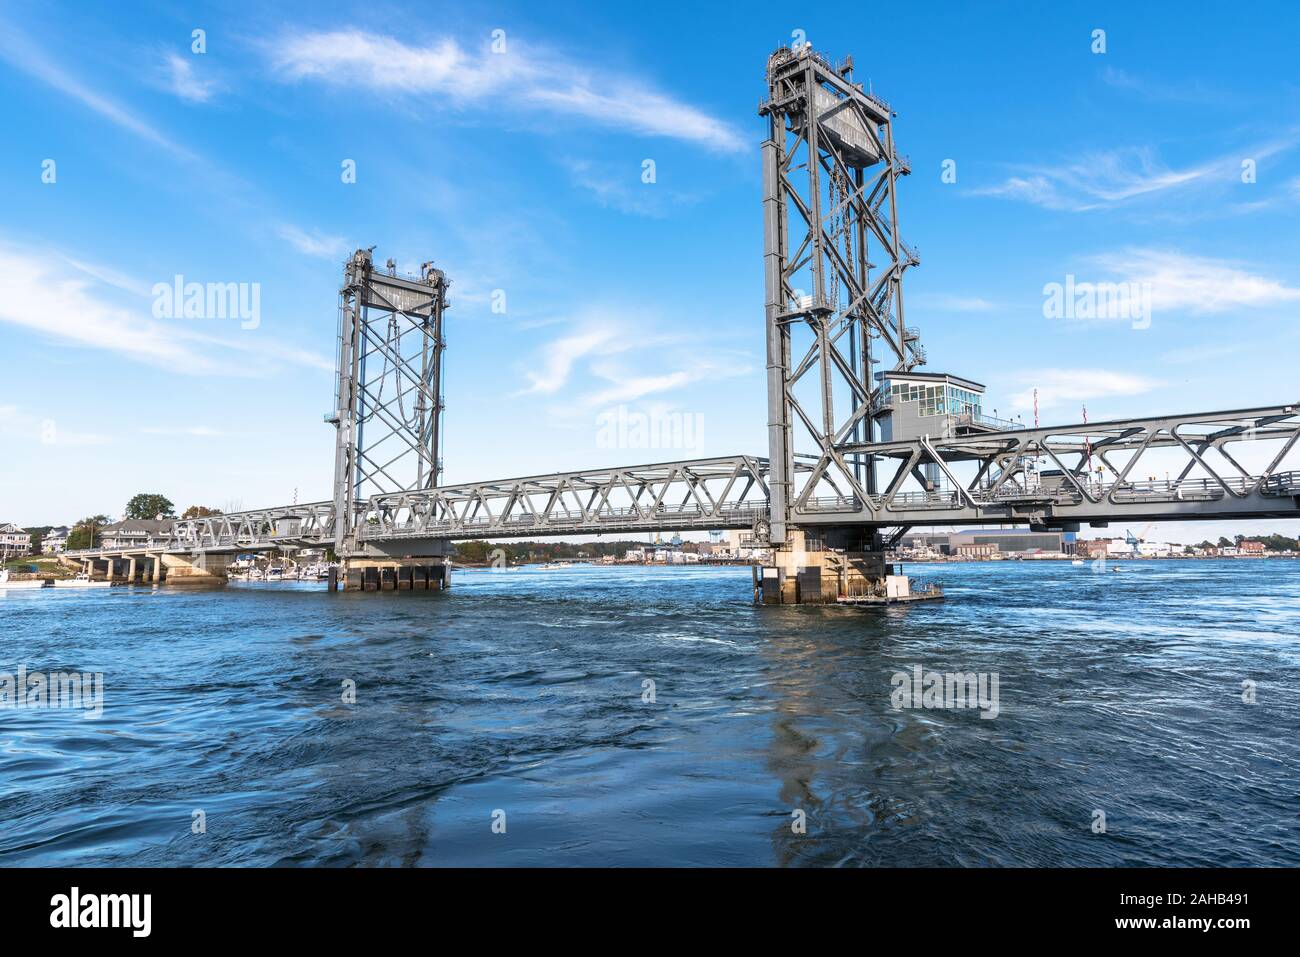 Vertical lift bridge spanning a mighty river on a clear autumn day Stock Photo